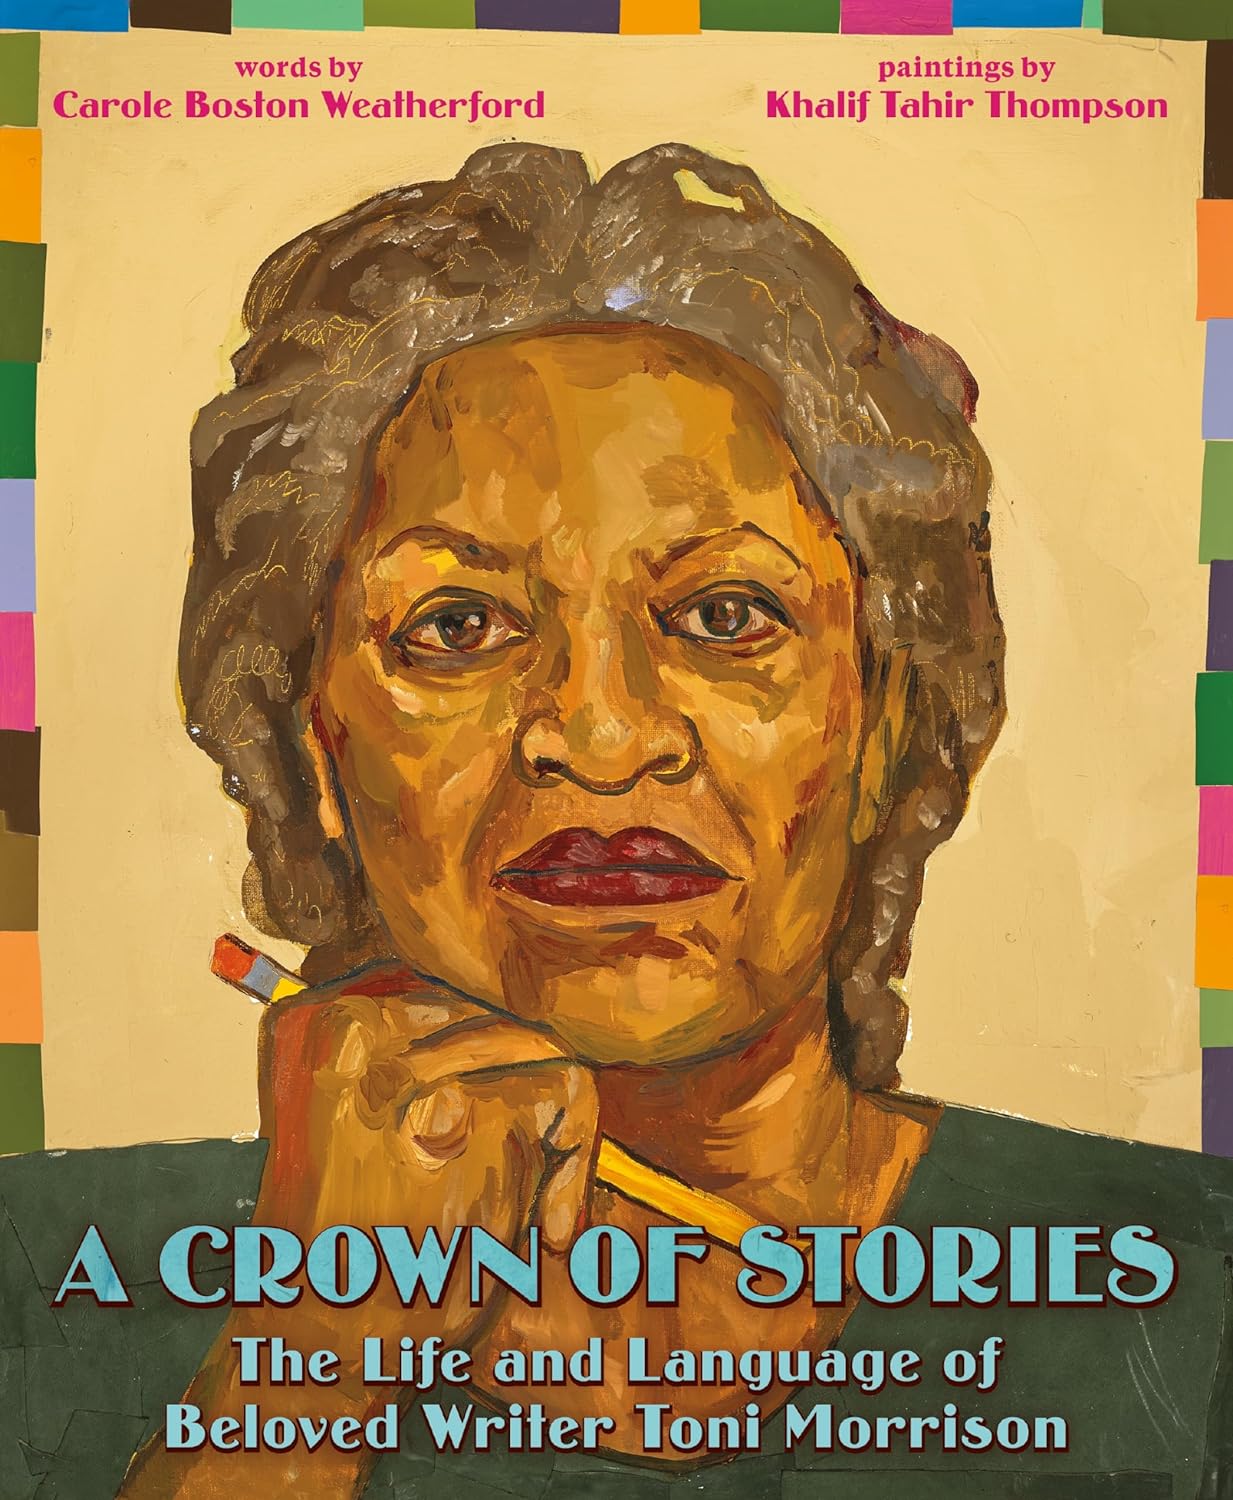 Book Cover Image of A Crown of Stories: The Life and Language of Beloved Writer Toni Morrison by Carole Boston Weatherford